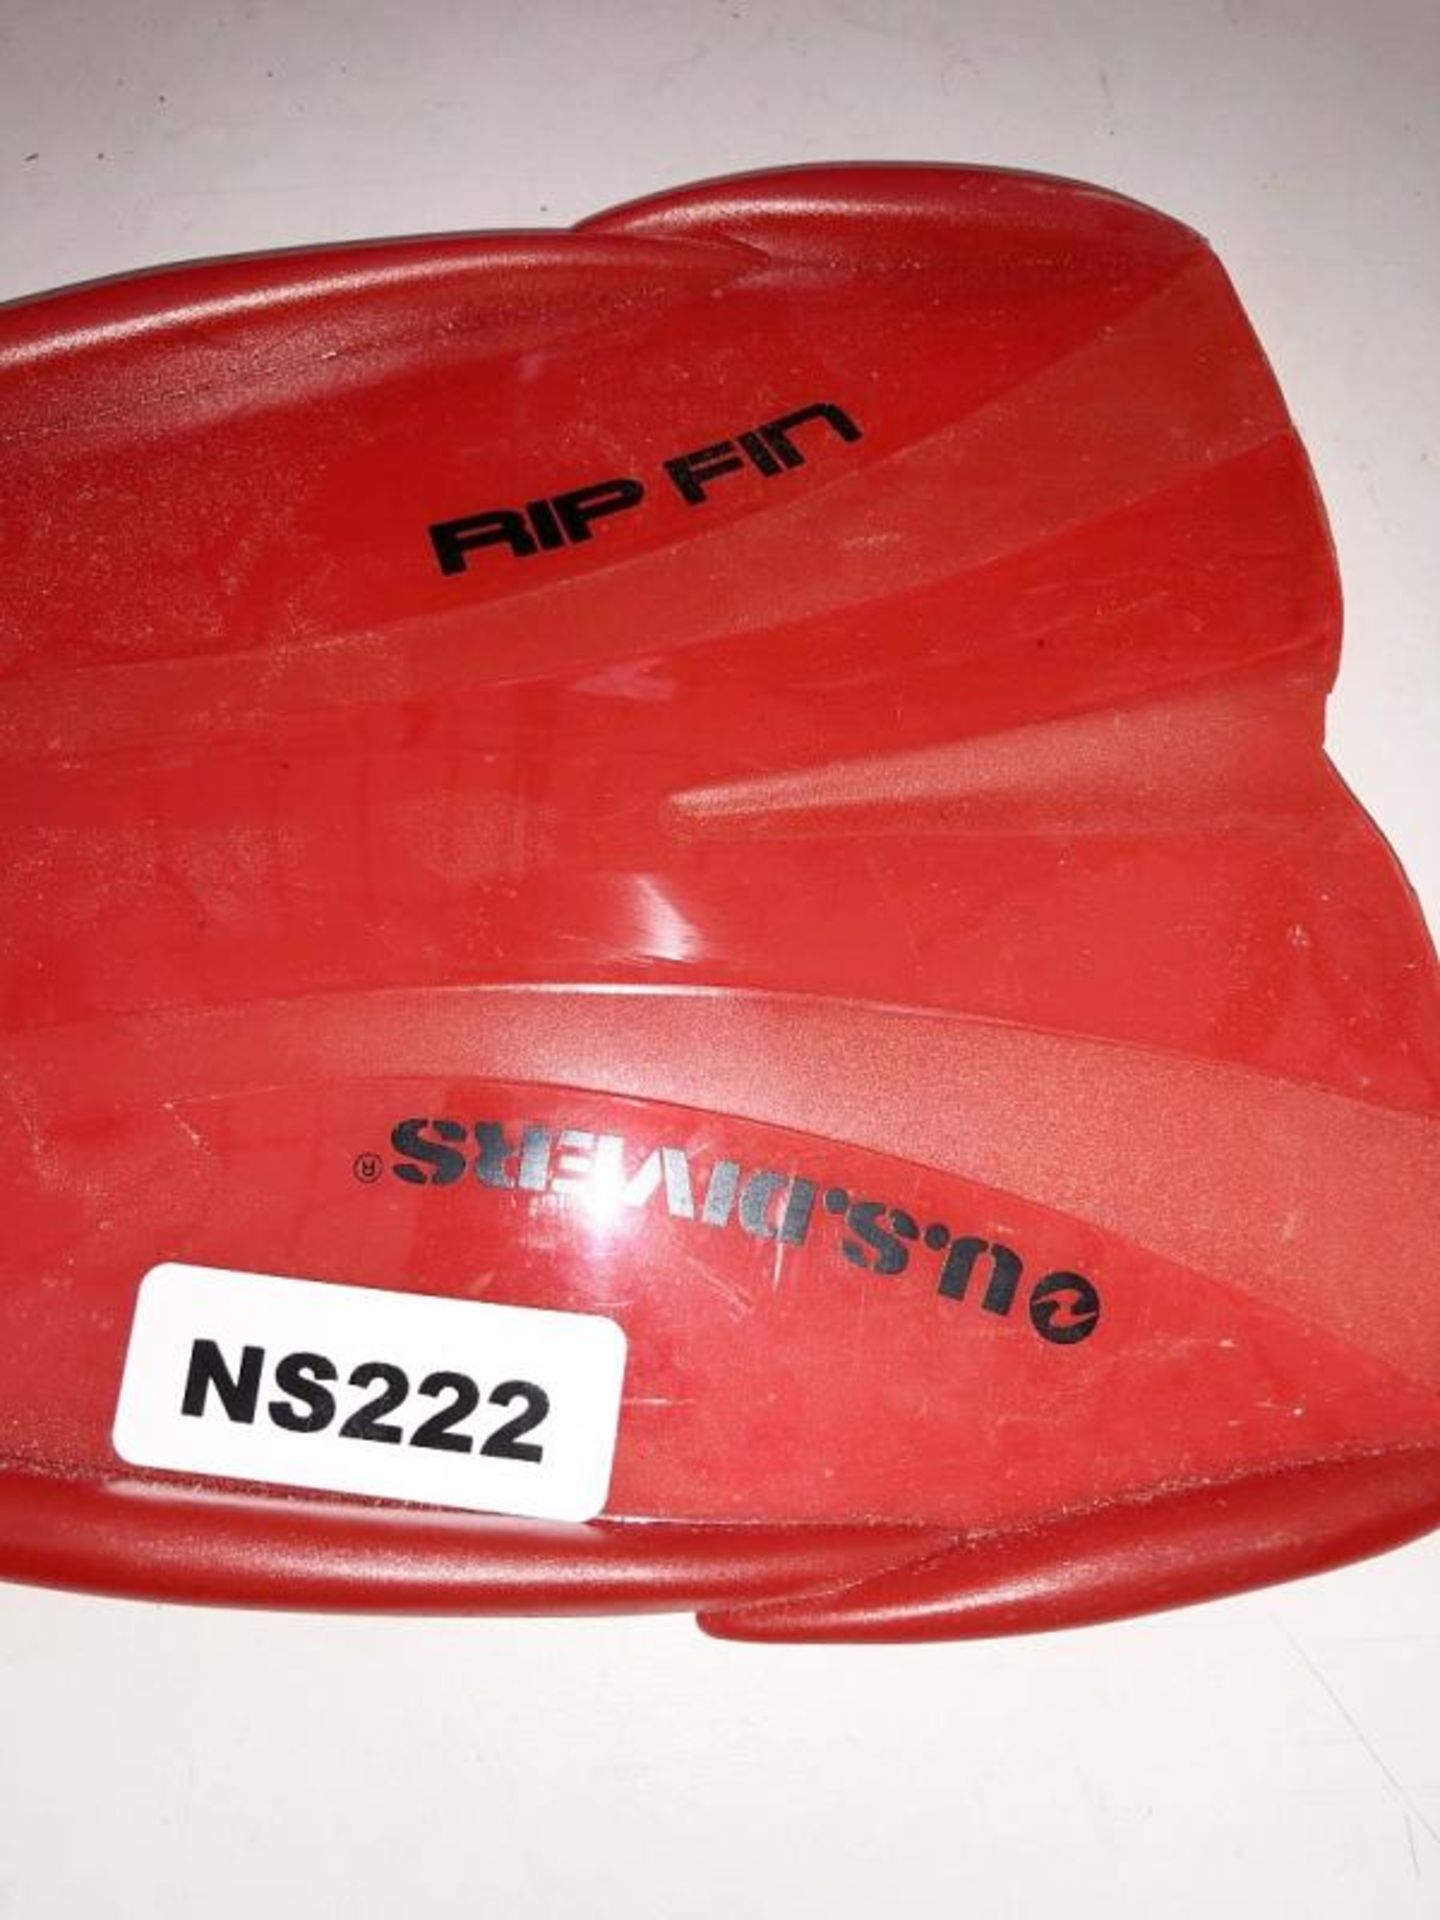 3 x Pairs Of Children's Diving Fins - CL349 - Location: Altrincham WA14 - Image 9 of 9